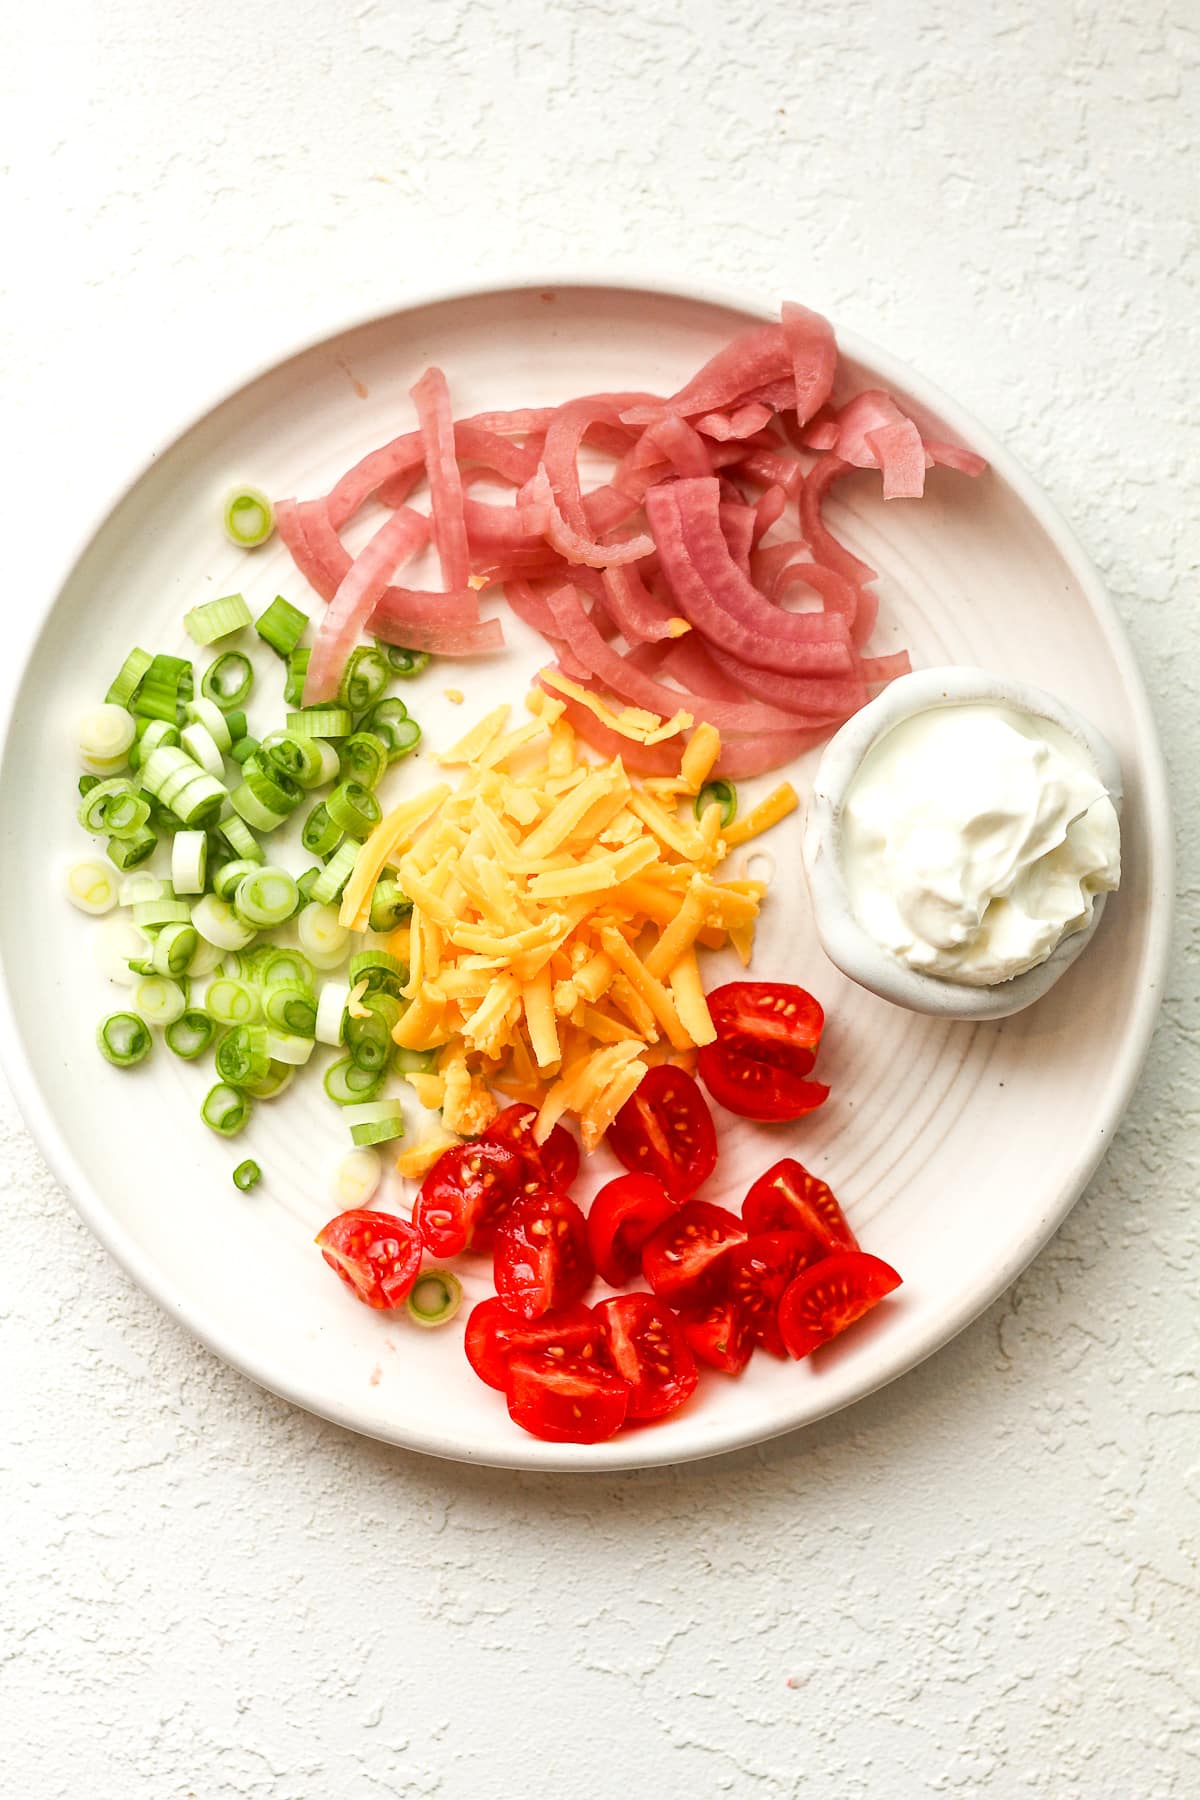 A plate of toppings.